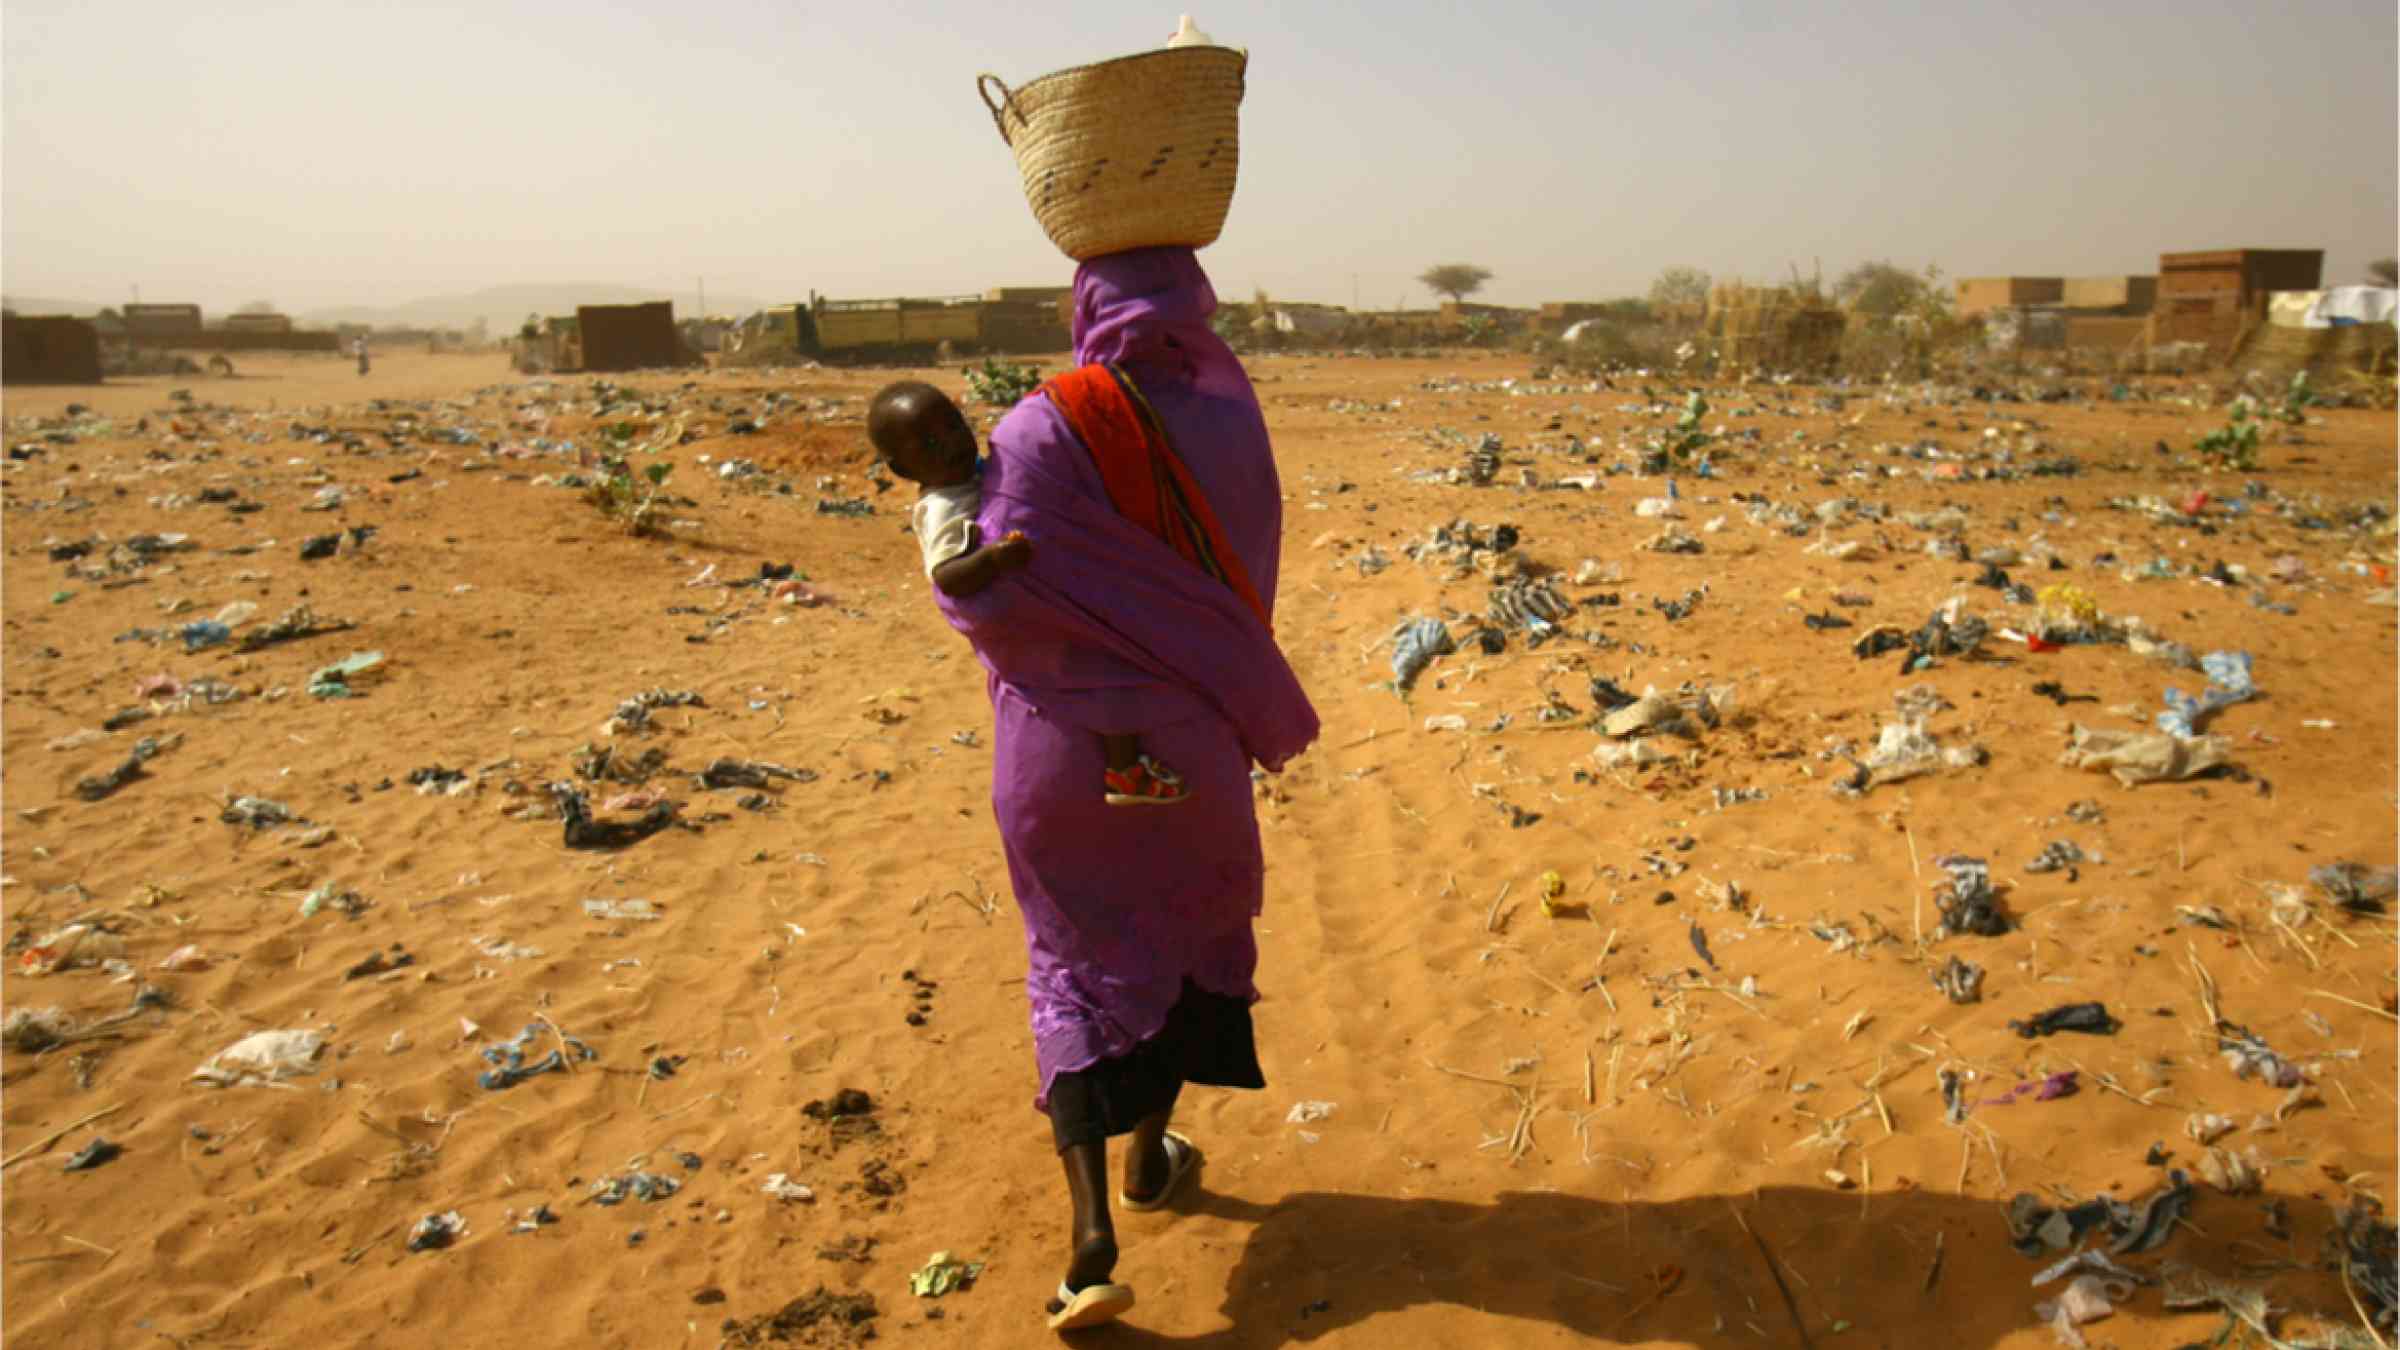 South Sudanese woman carrying her baby through polluted sand field.